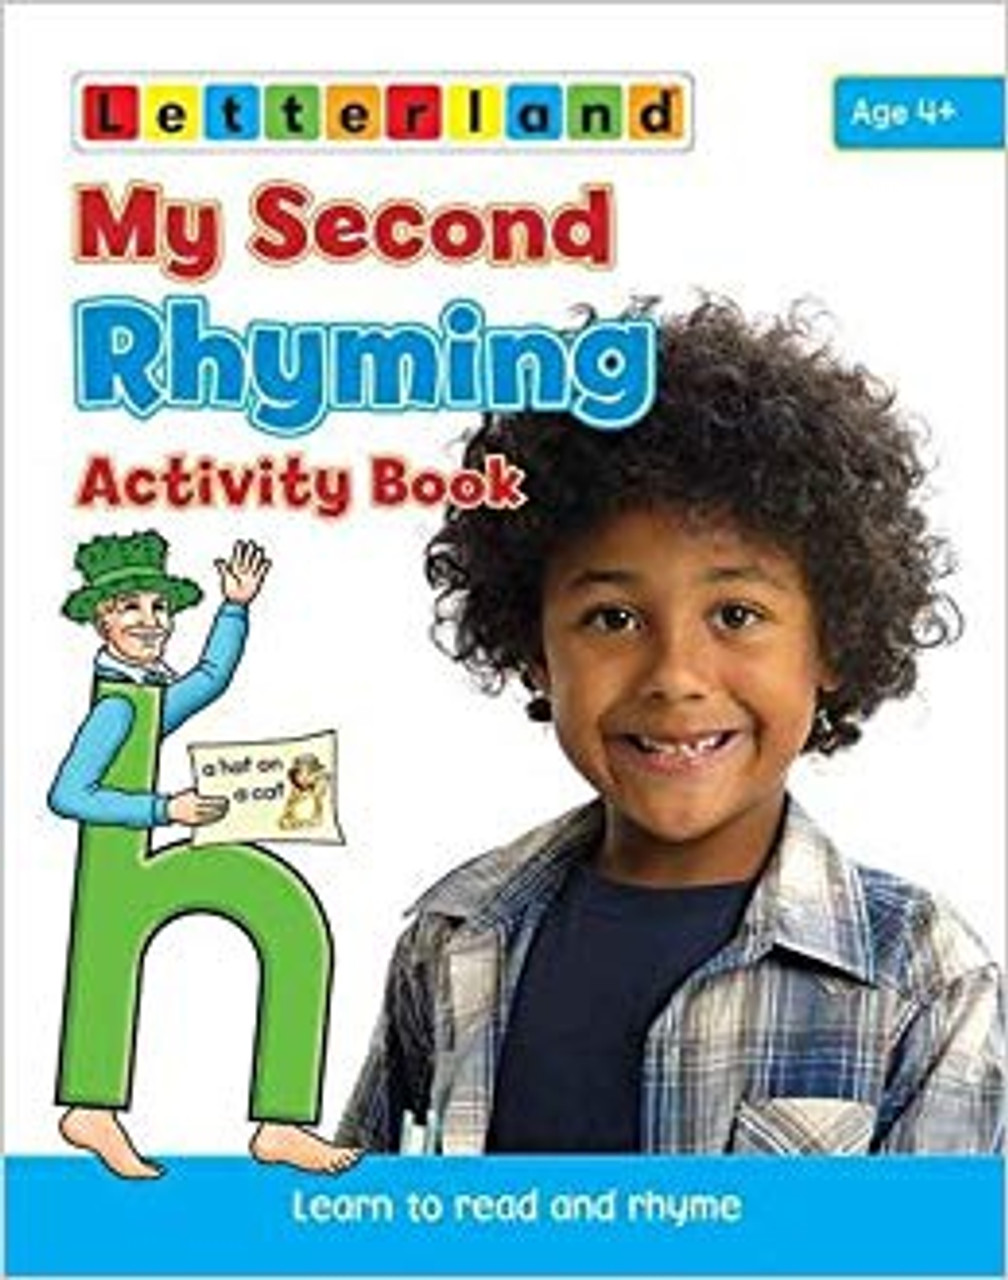 LETTERLAND MY SECOND RHYMING ACTIVITY BOOK